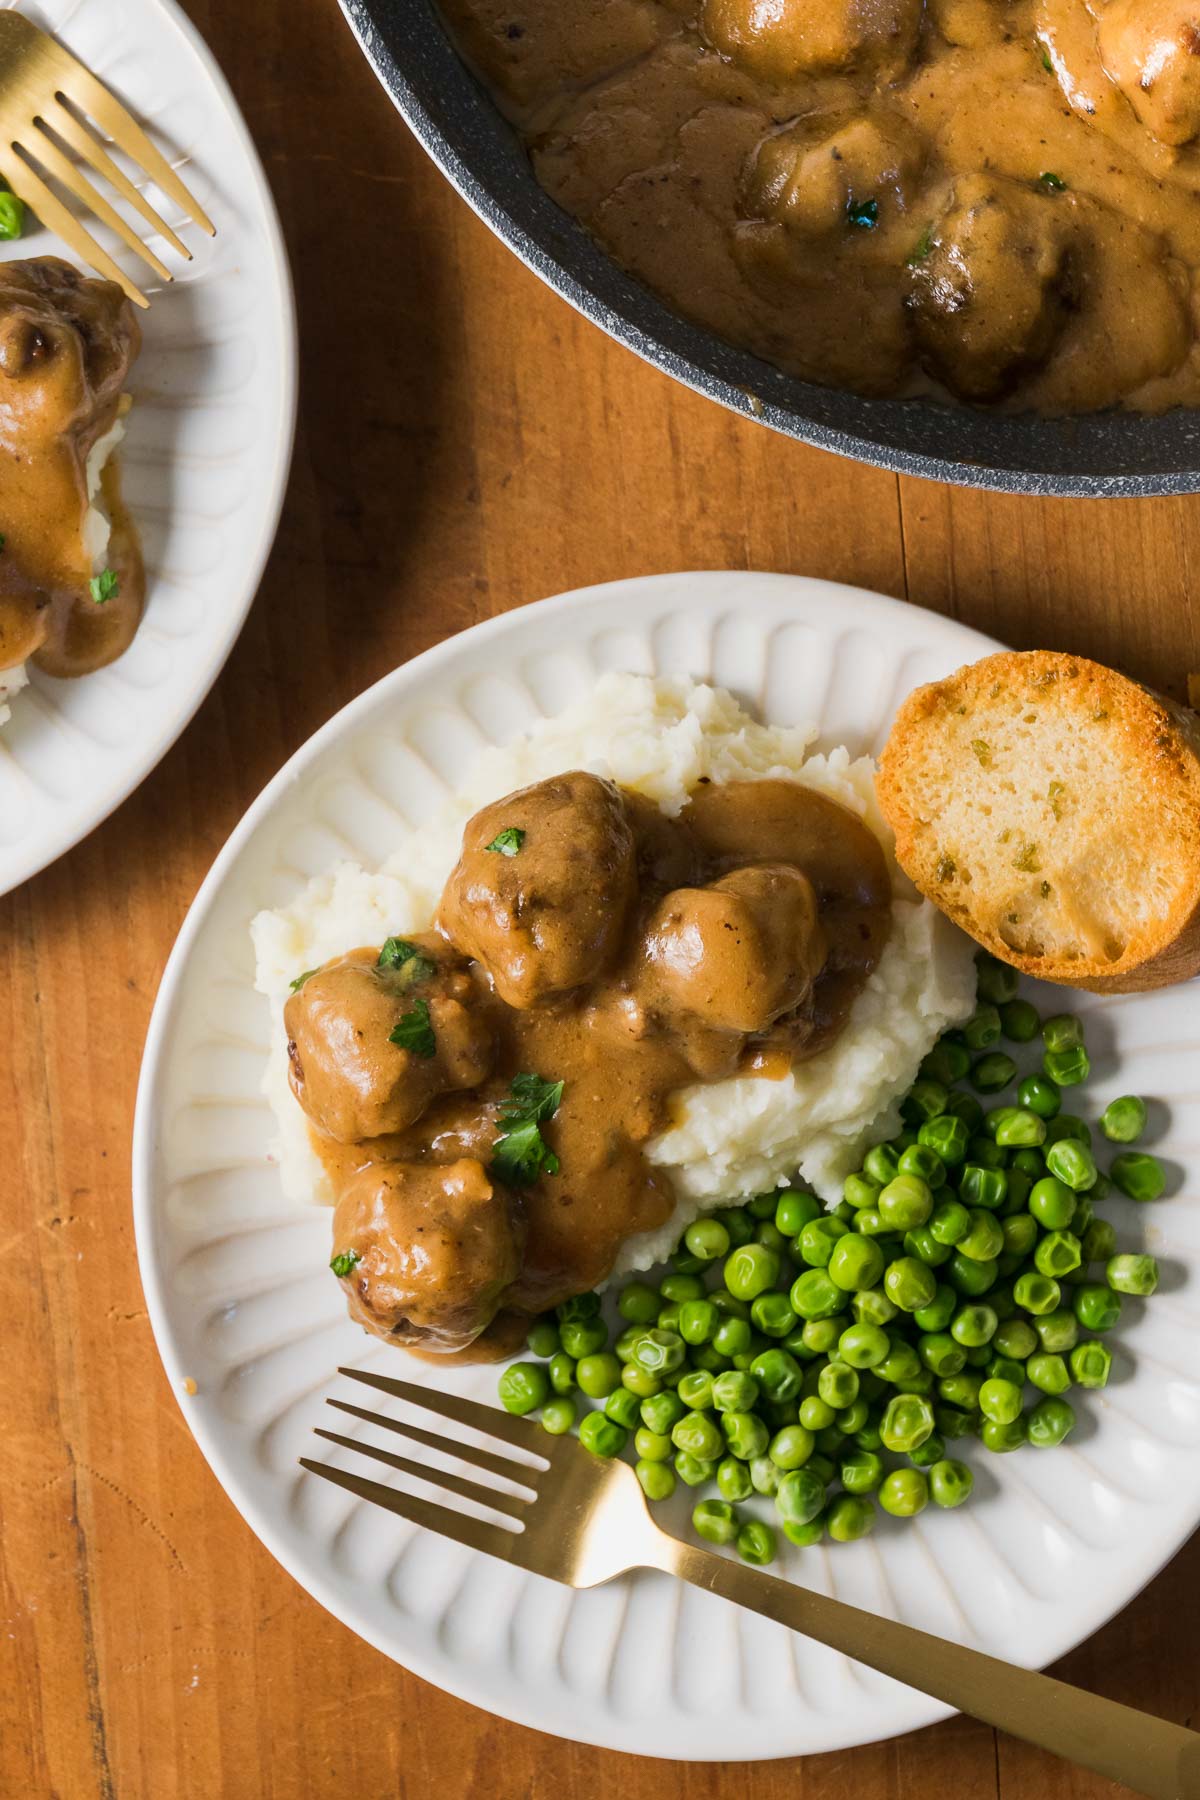 A dinner table set with plates of crock pot Swedish meatballs over mashed potatoes and peas.